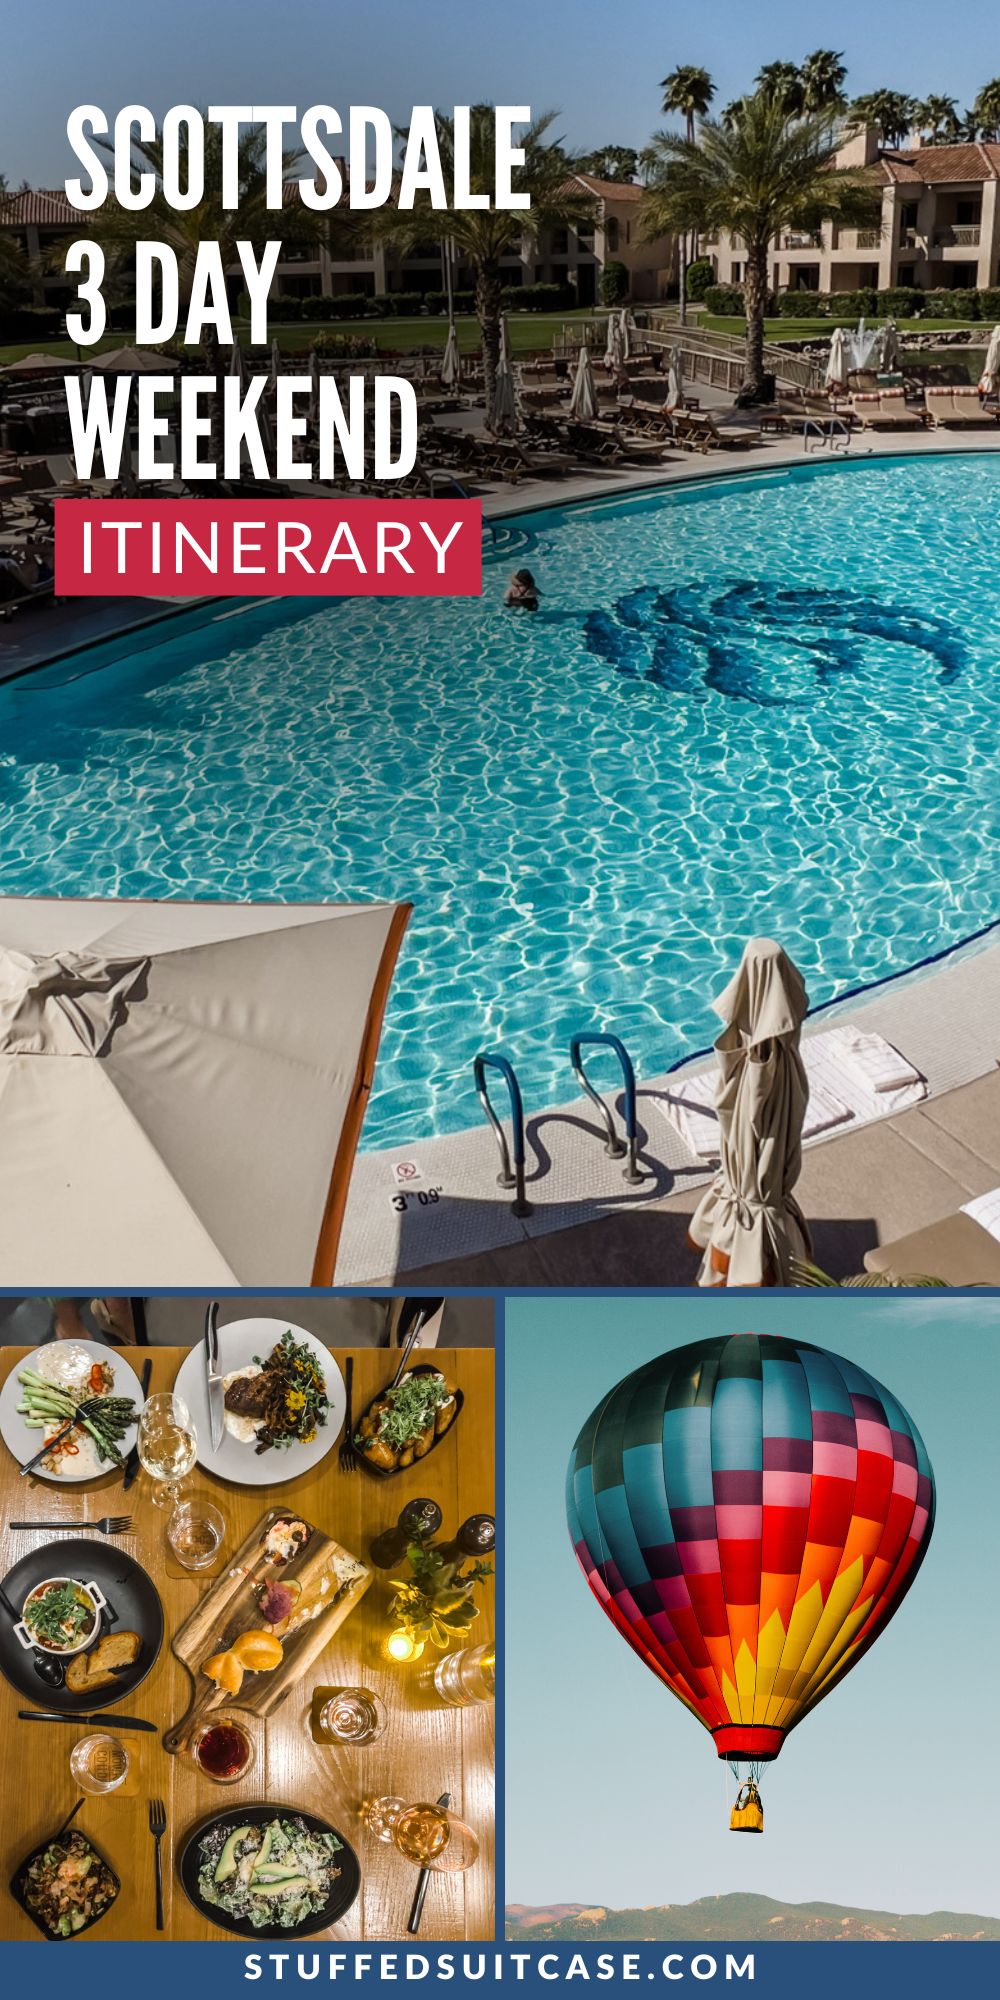 collage of pool, food on table, and hot air balloon for scottsdale 3 day itinerary